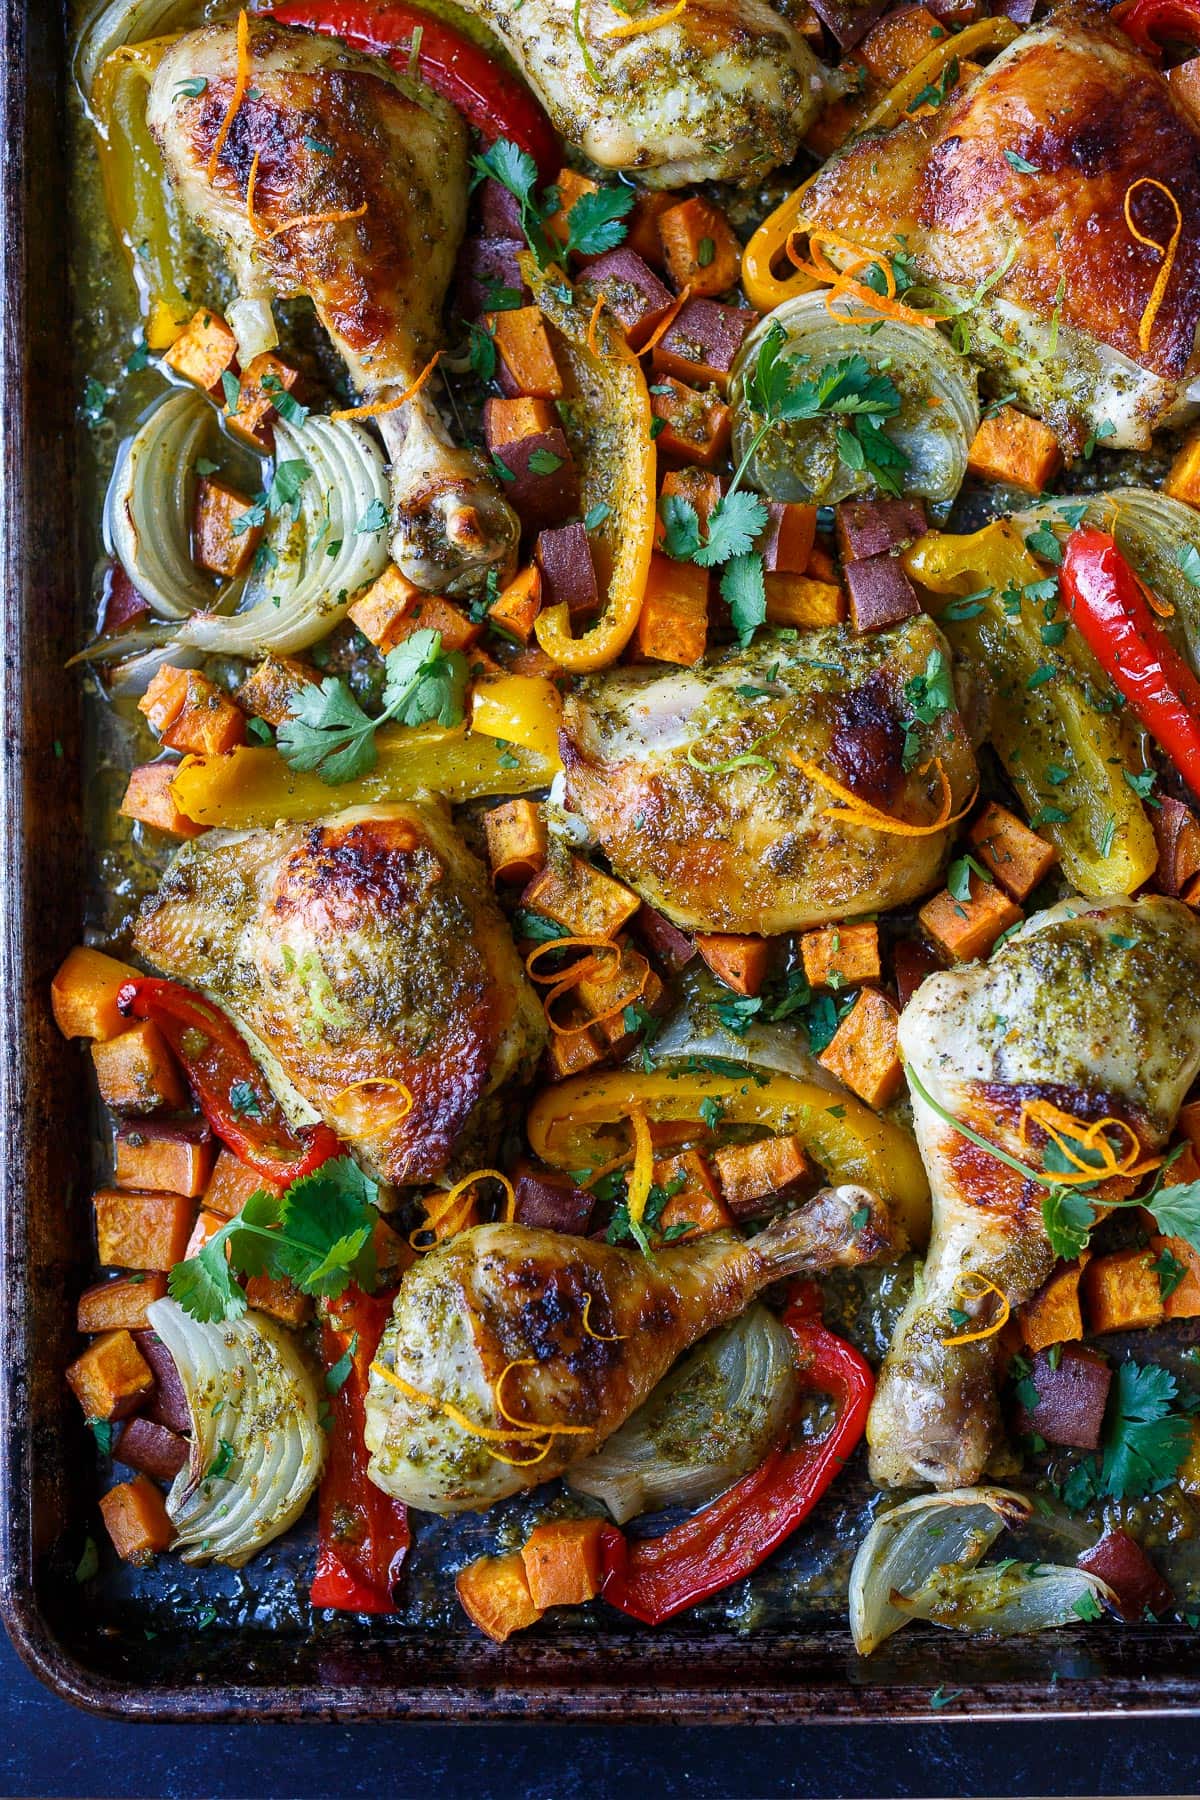 A delicious recipe for Cuban Mojo Chicken. Thighs and legs roasted in the oven with a citrusy mojo marinade alongside yams and peppers. An easy sheet pan dinner!